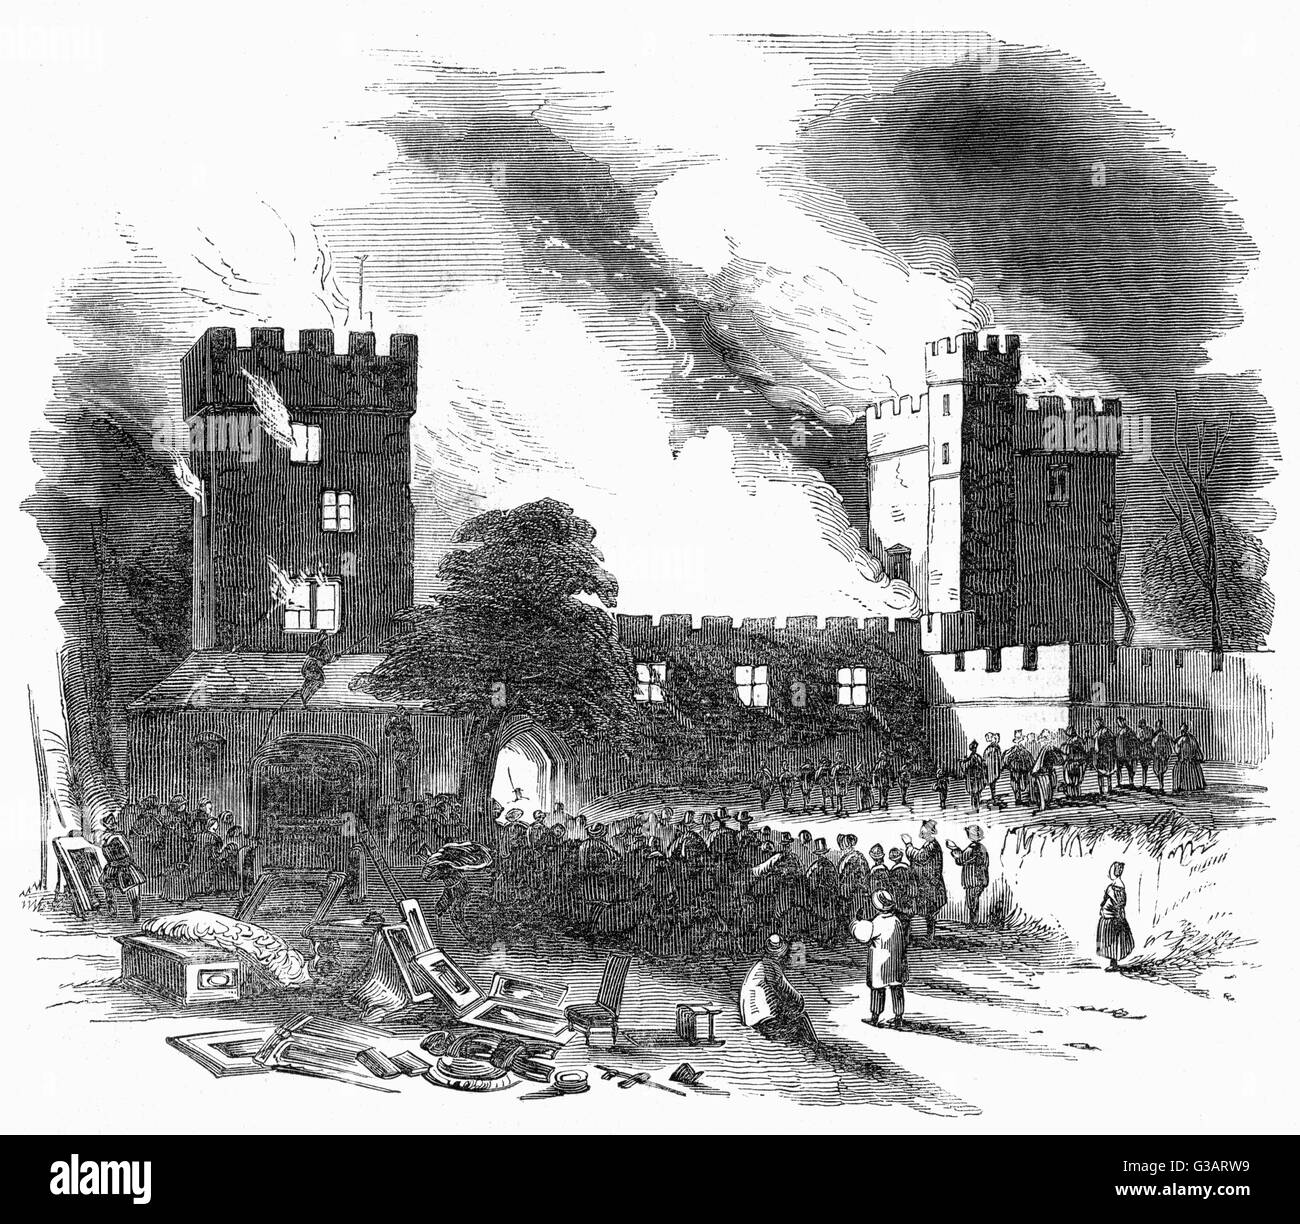 Devastating fire at Naworth Castle in Cumbria, England. The fire destroyed virtually all of the Castle, including the old dungeons in the West Wing. Only the top rooms of Lord Williams Tower, (his bedchamber, private library and chapel) survived.       Da Stock Photo